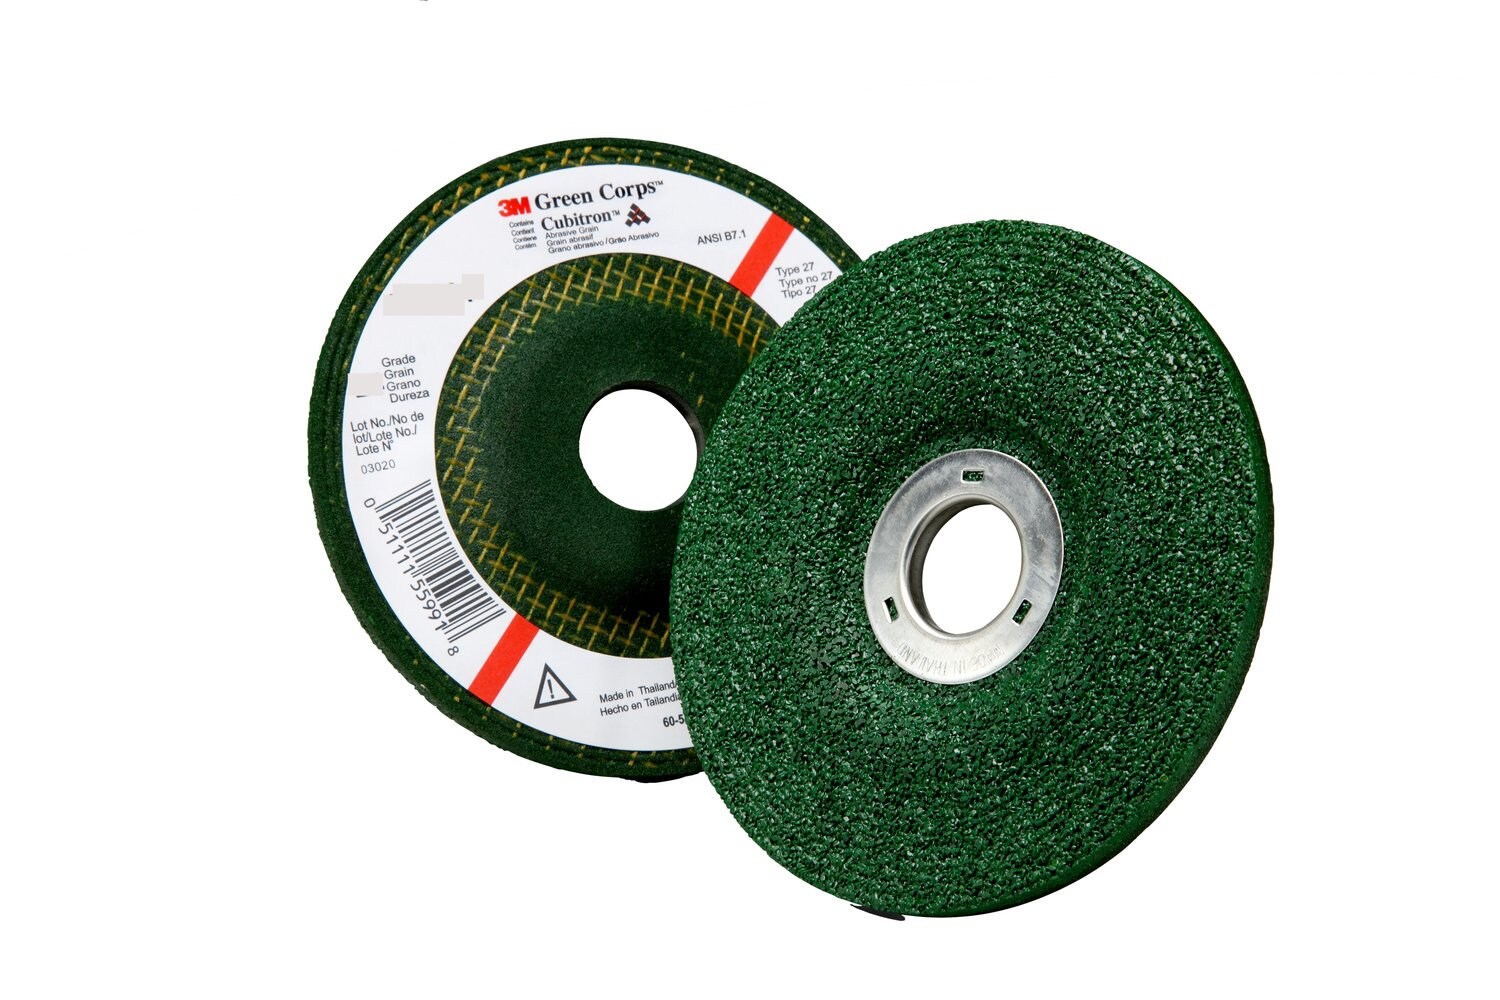 7000118599 - 3M Green Corps Depressed Center Grinding Wheel, T27 4-1/2 in x 1/4 in
x 7/8 in, 36, 10/Carton, 40 ea/Case